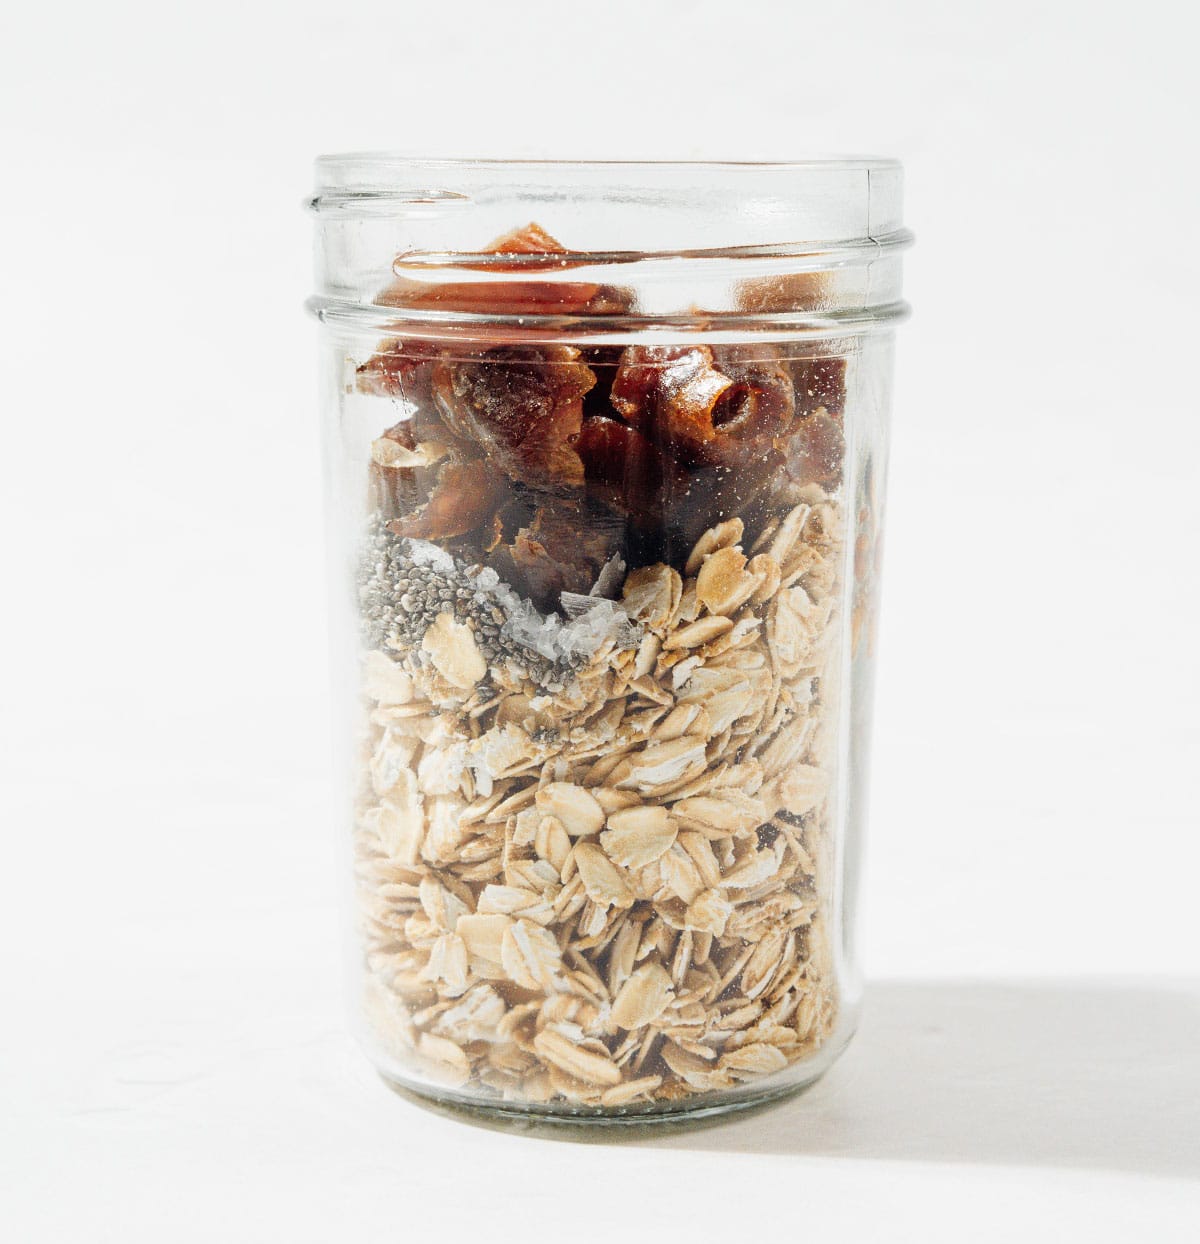 Ingredients for date overnight oats in a jar.